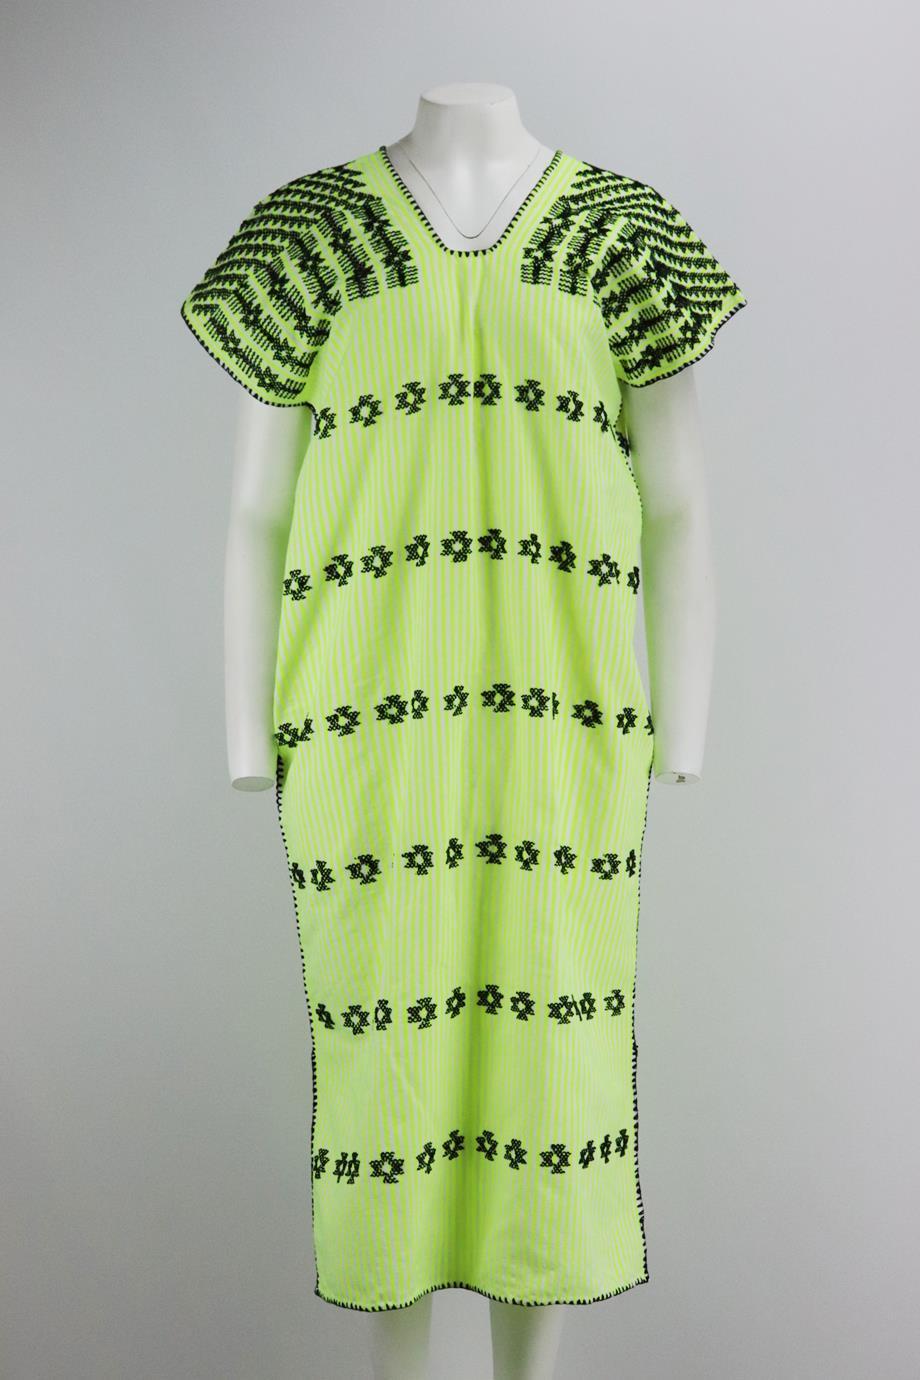 Pippa Holt embroidered cotton blend kaftan. White, black and neon-green. Short sleeve, scoop neck. Slips on. 80% Cotton, 20% polyester. Size: One Size. Bust: 45 in. Waist: 45 in. Hips: 45 in. Length: 46 in Very good condition - No sign of wear; see